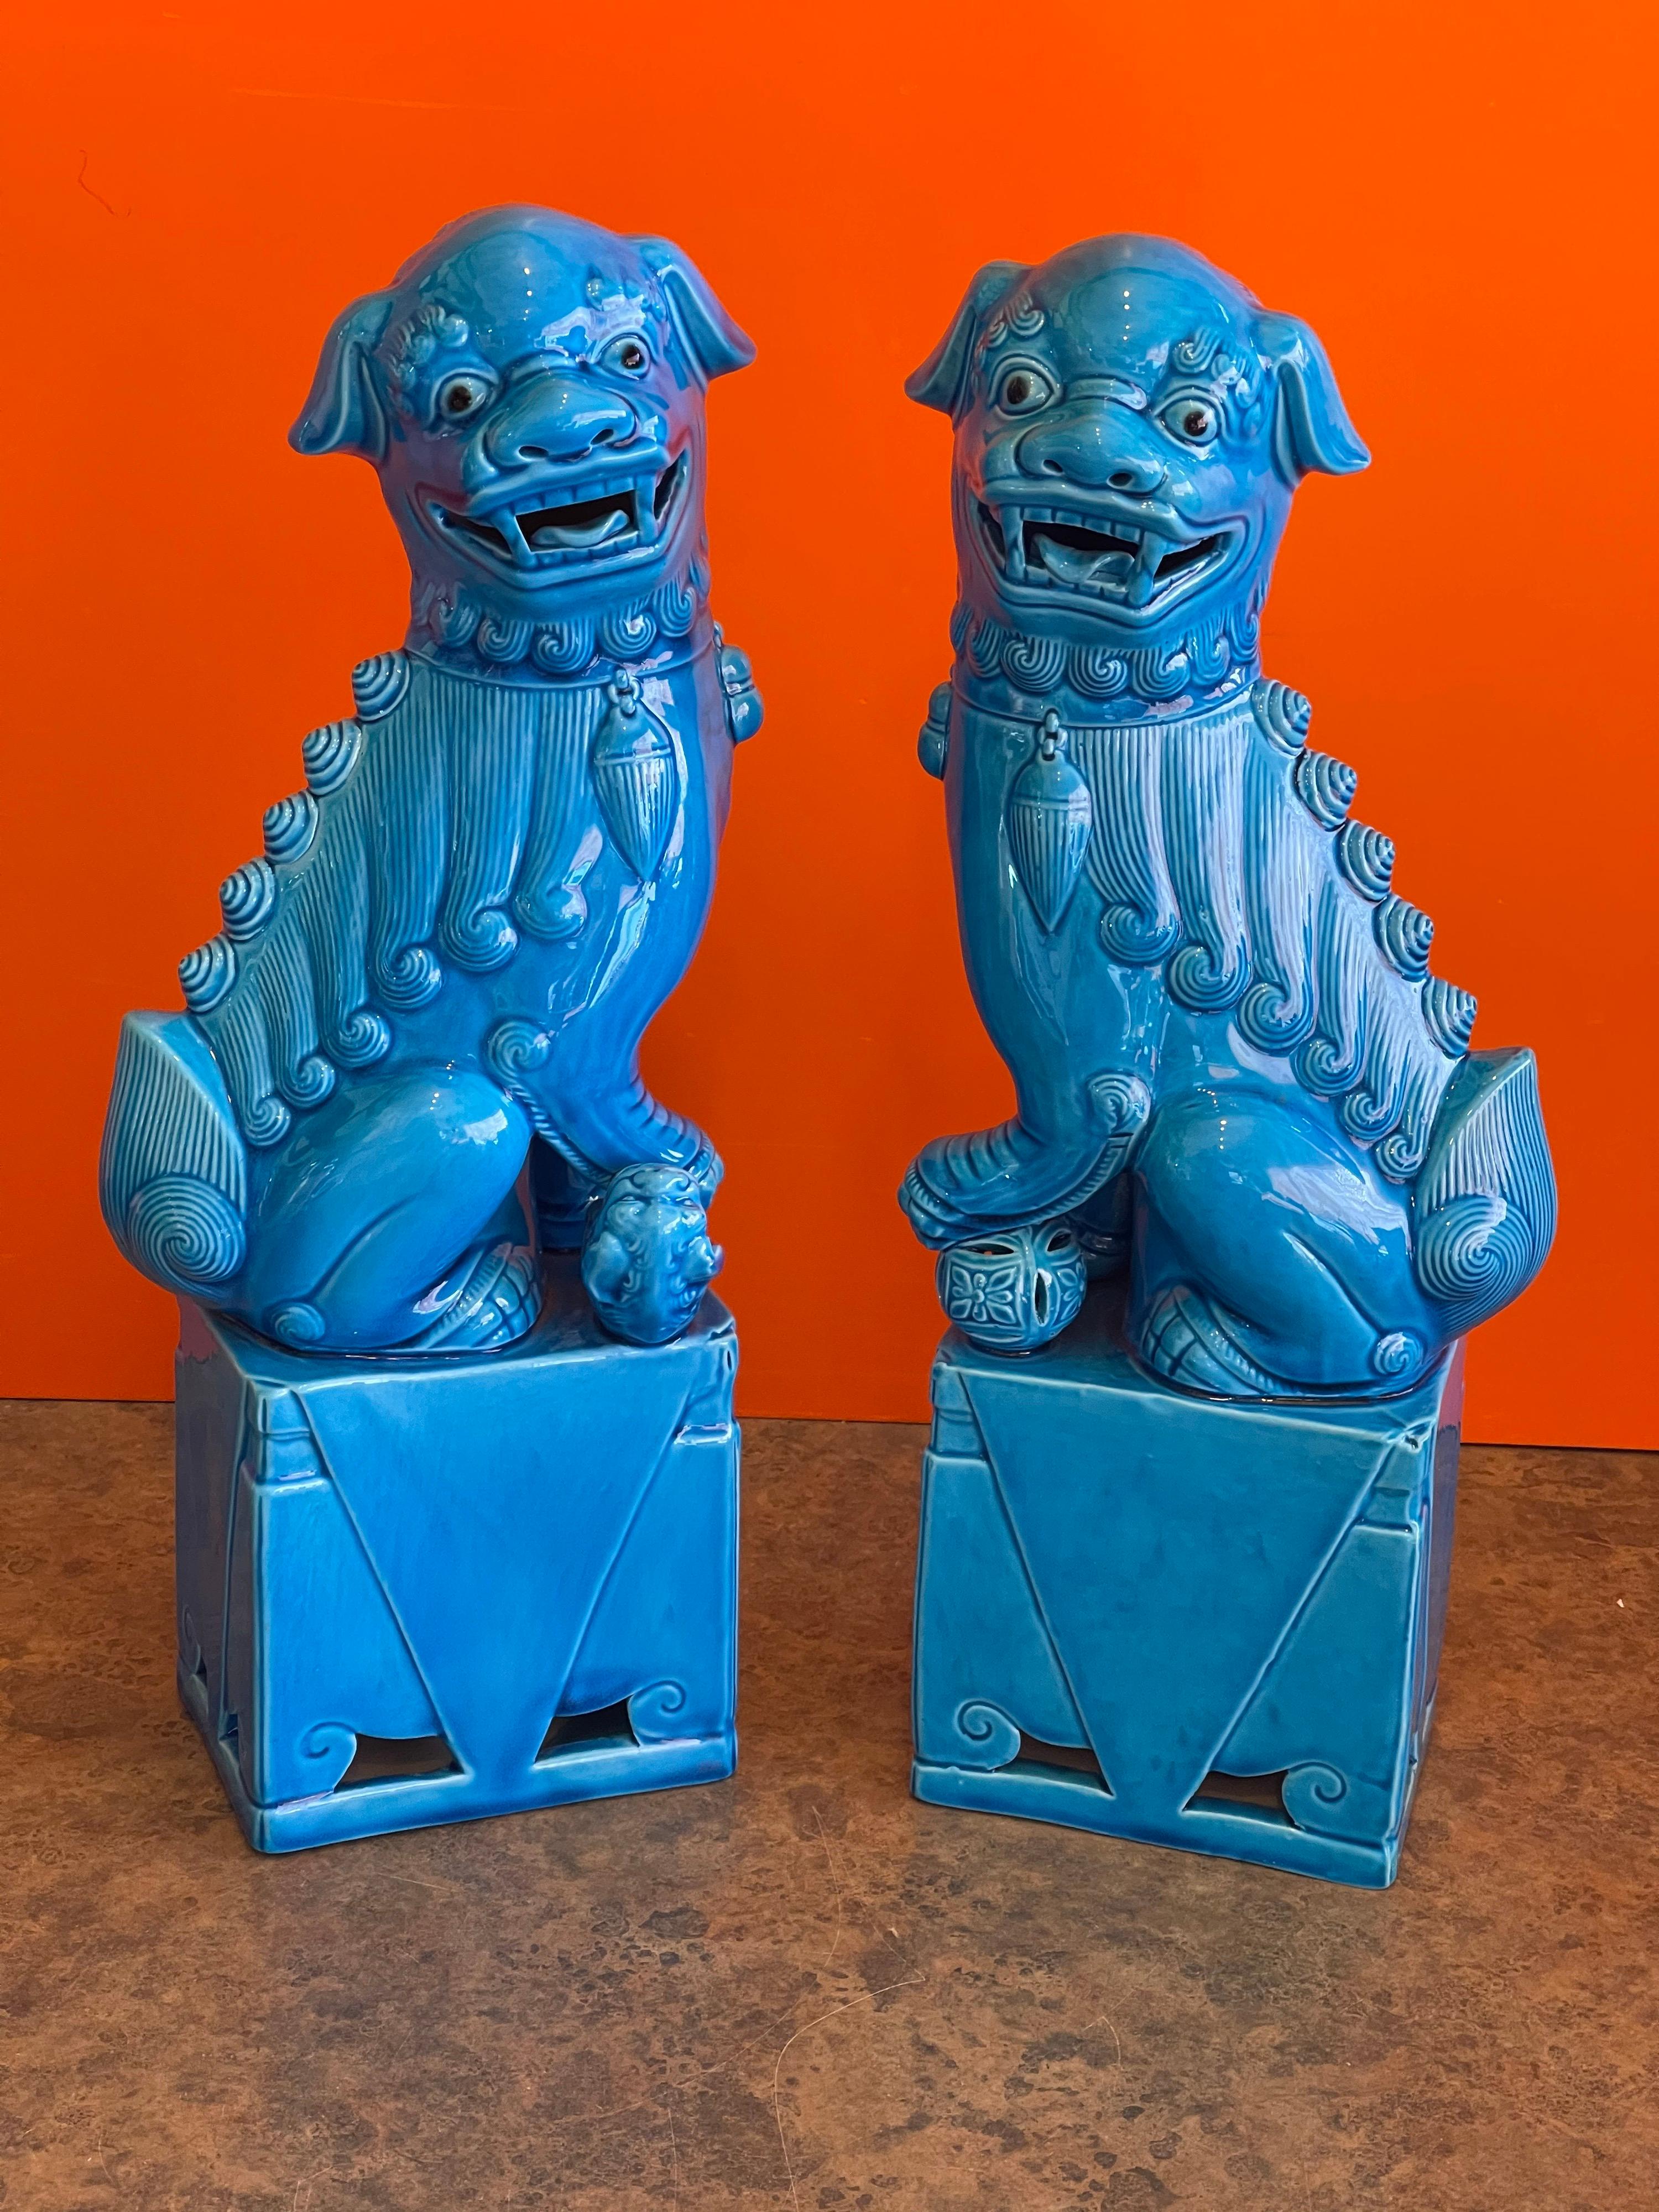 Massive pair of vintage turquoise blue ceramic foo dog sculptures, circa 1960s. These symbolic guardians present a beautiful turquoise hue along with great lines and swirls in the ceramic. 
The pair are in very good condition with no chips, cracks